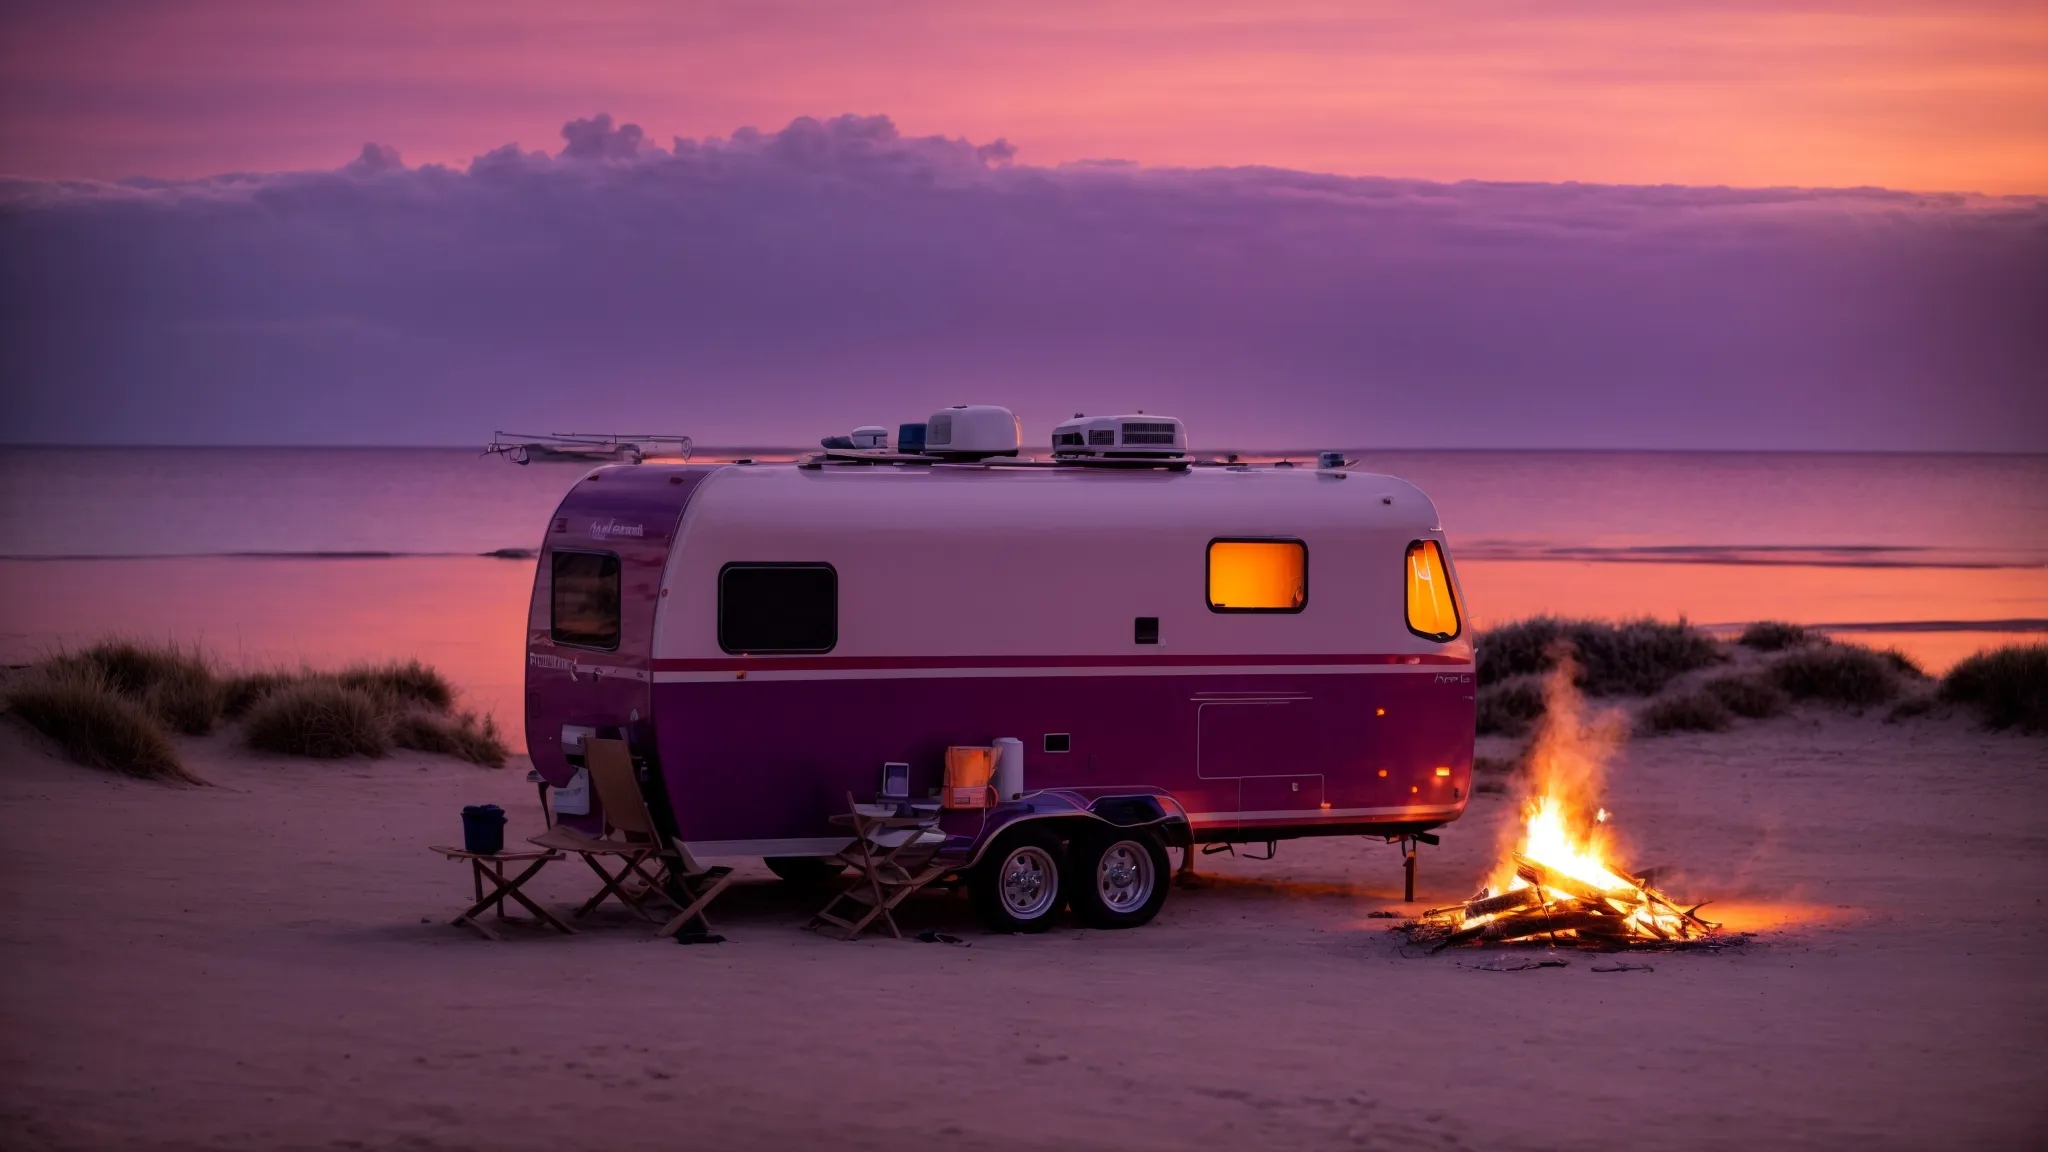 a campfire flickers near a parked rv on a secluded beach as the sunset paints the horizon in hues of orange and purple.